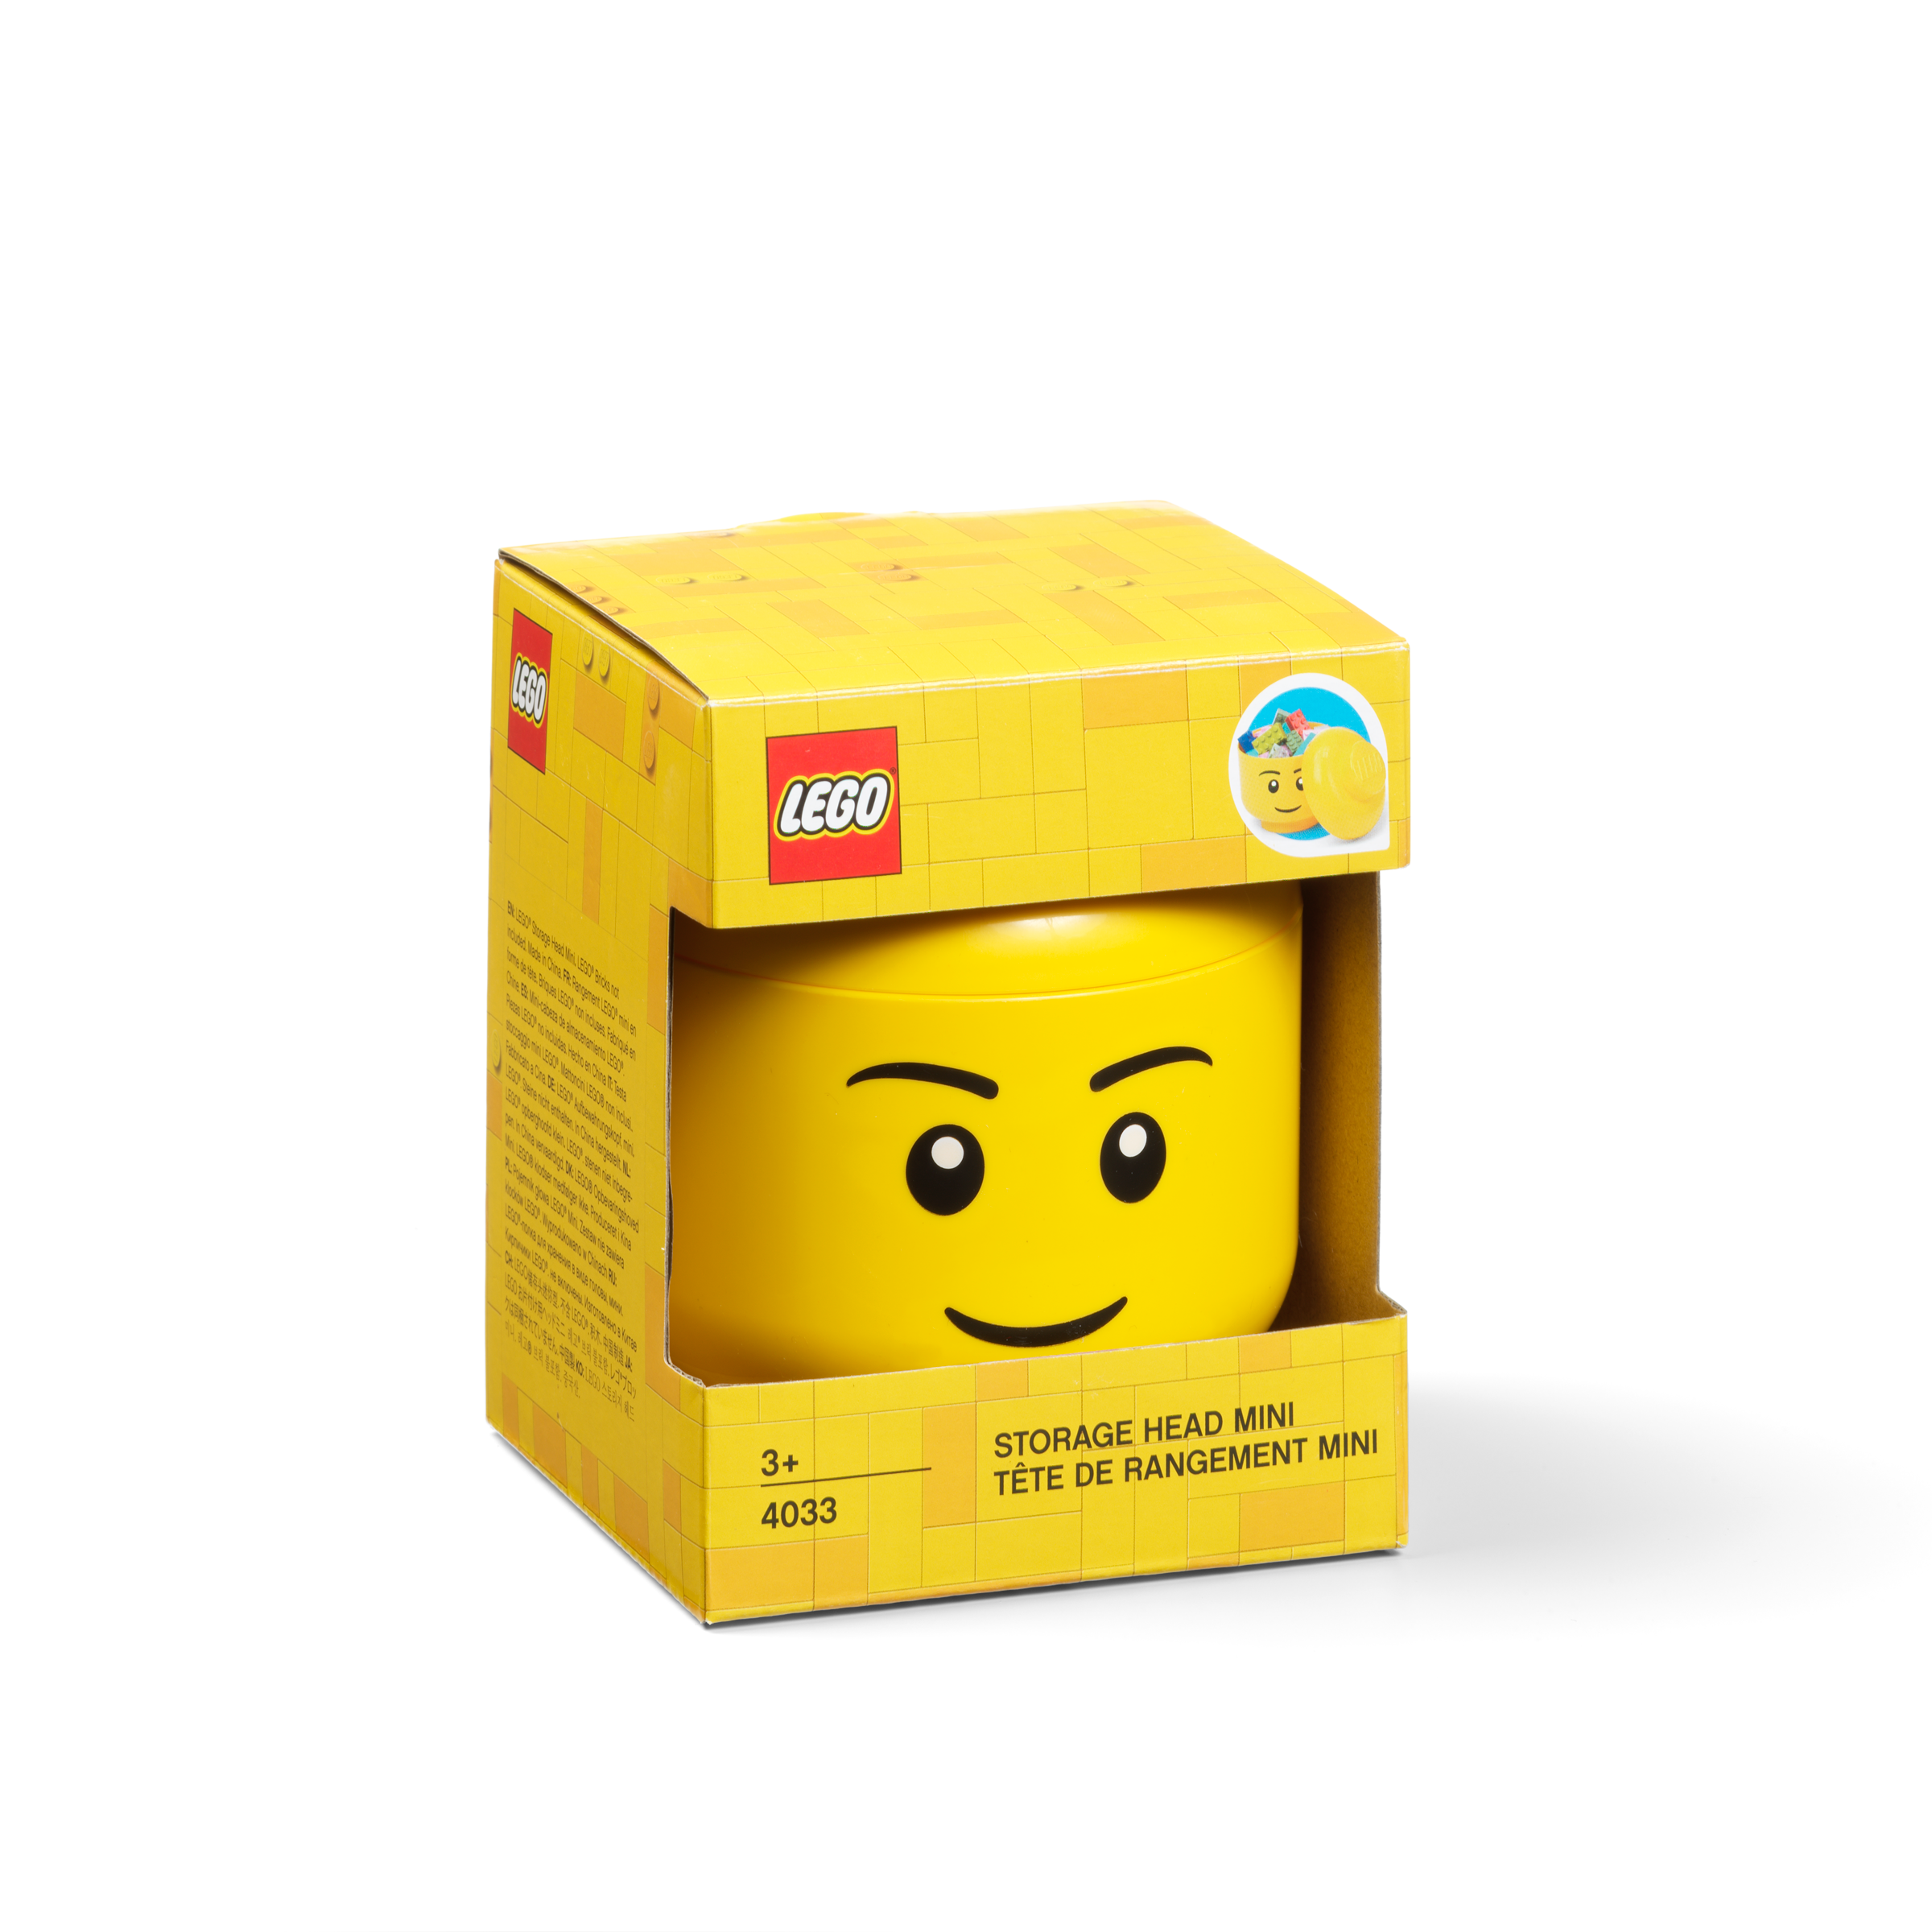 The Toy Box Lego Box Toy Packaging PP Plastic Storage Box - China